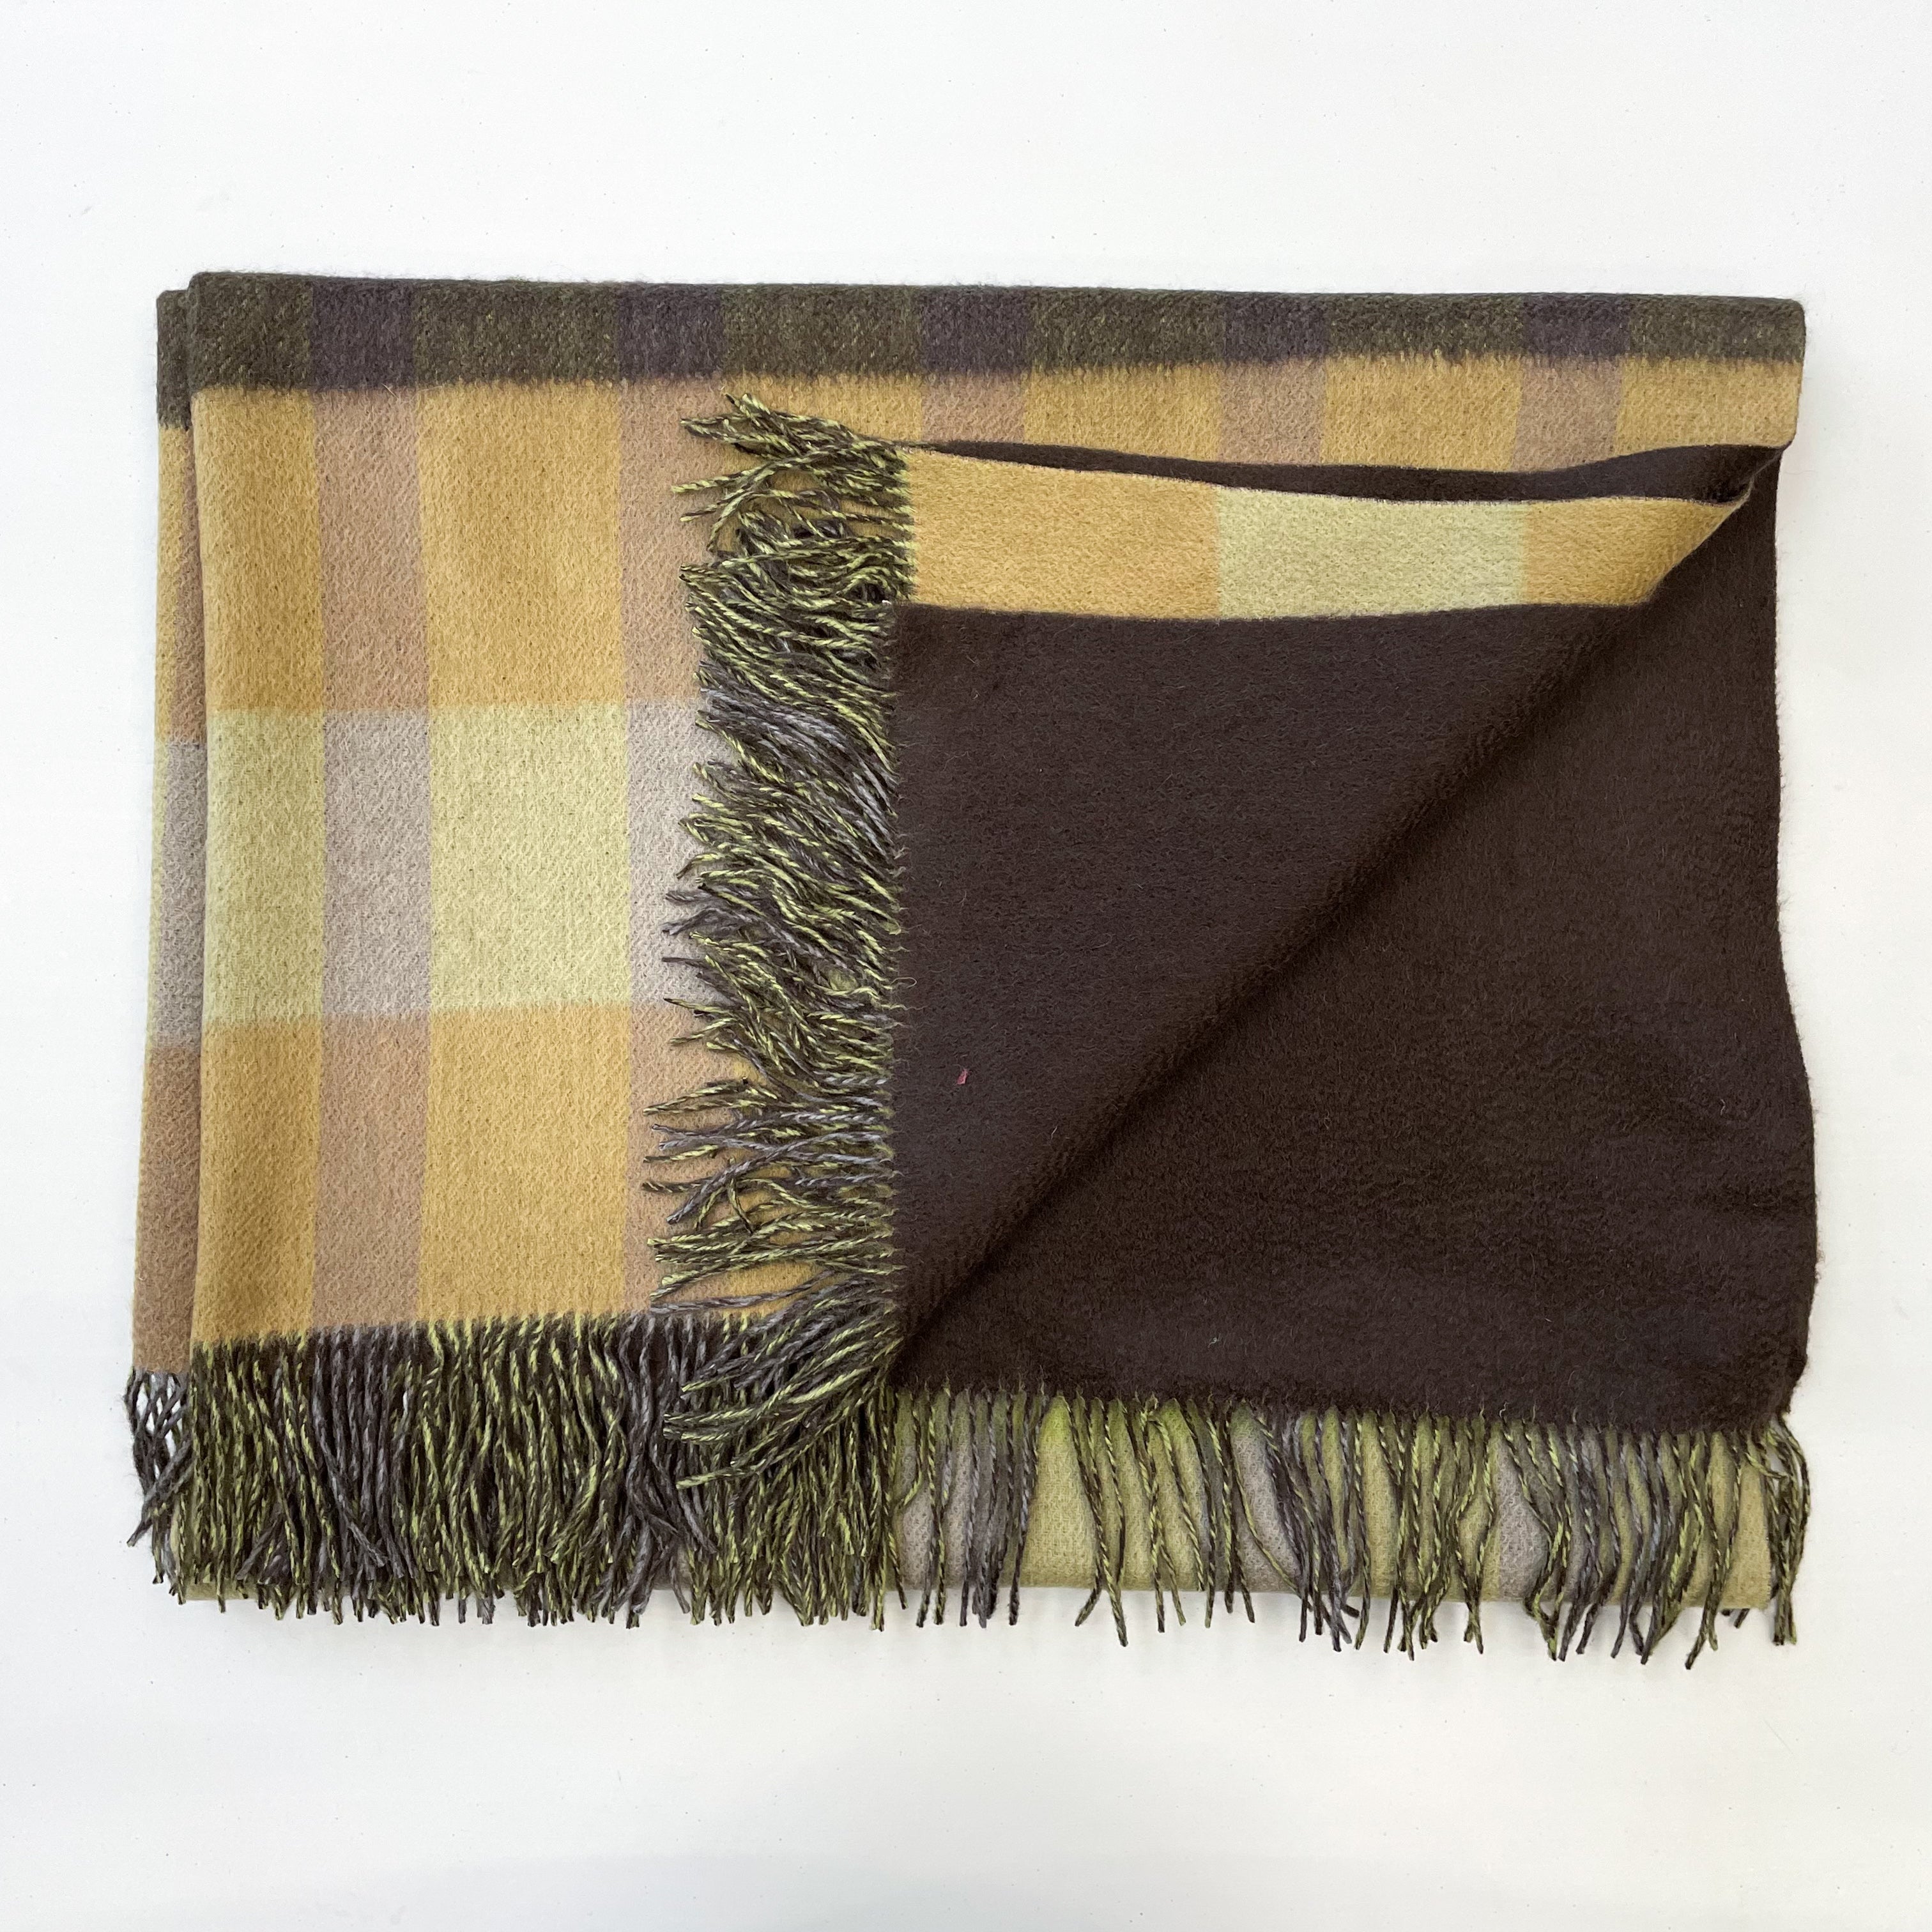 Green, Blue and Beige Tartan Cashmere Fringed Woven Blanket